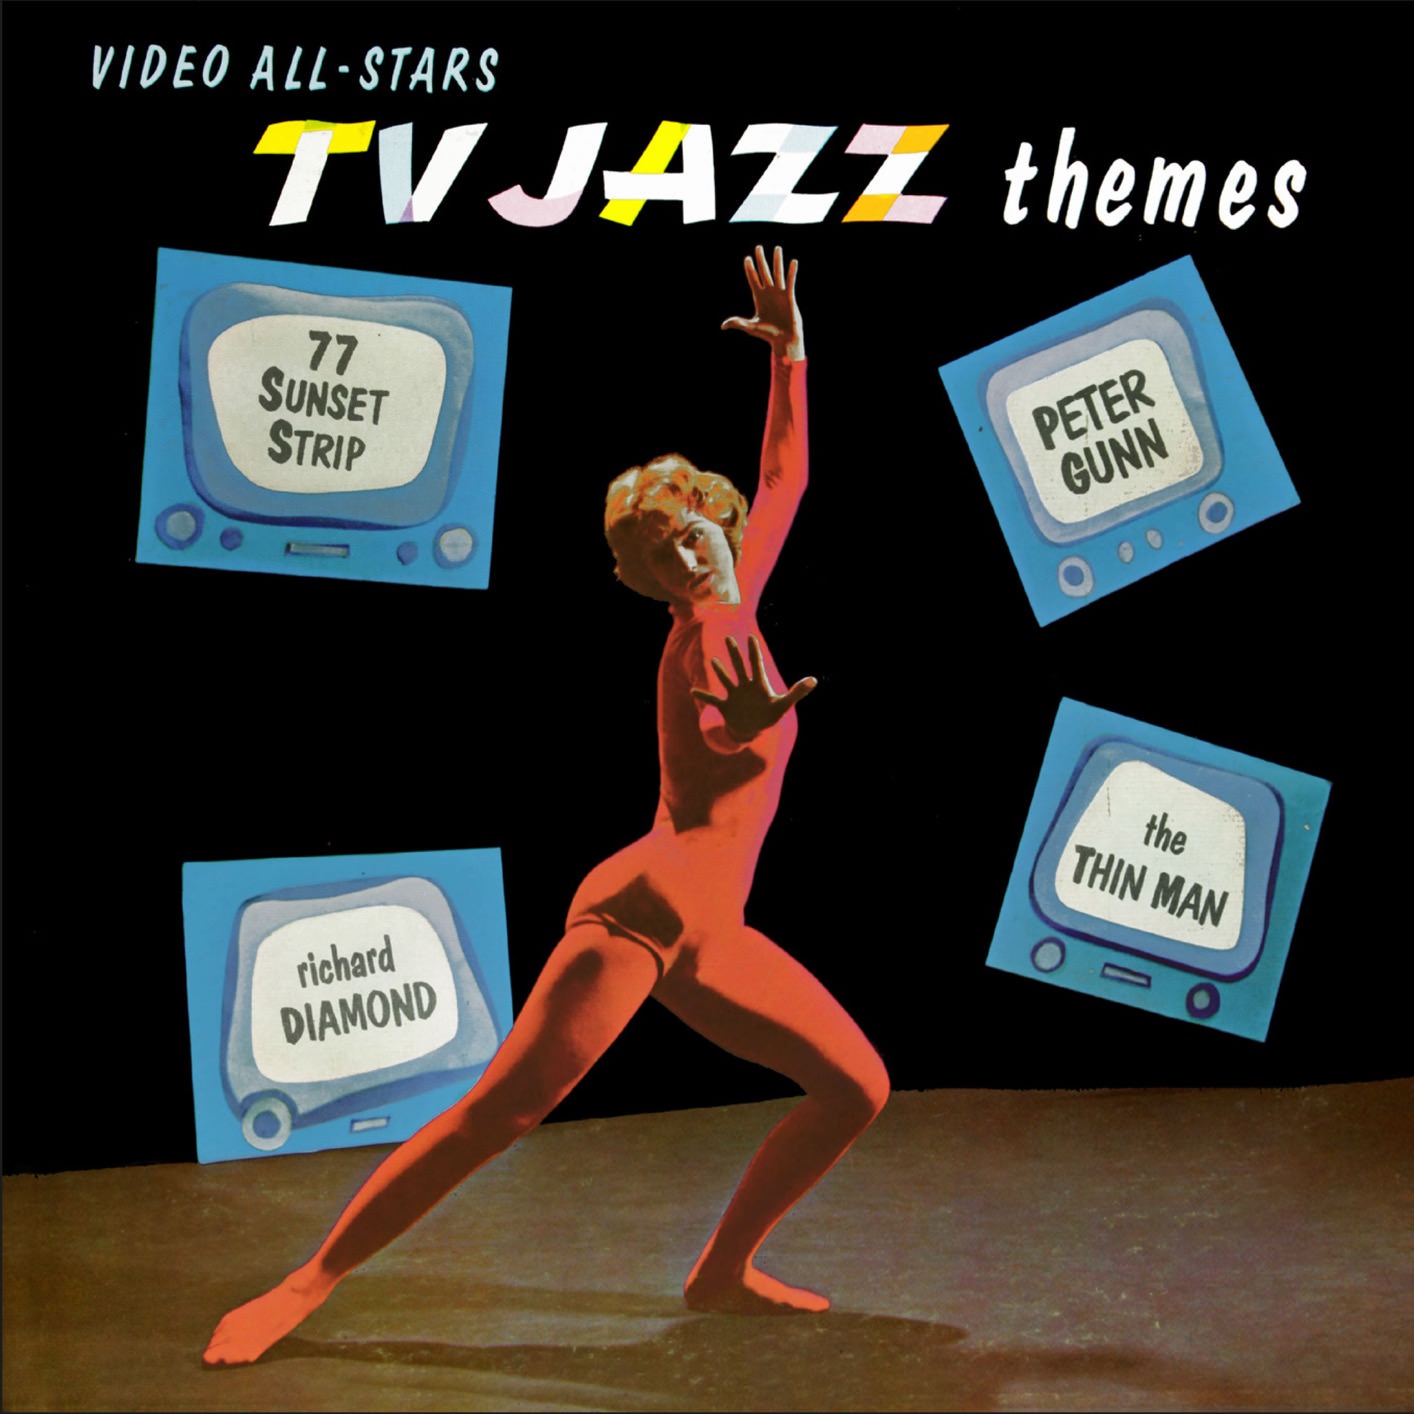 Skip Martin & The Video All-Stars - TV Jazz Themes (Remastered from the Original Somerset Tapes) (2017/2018) [FLAC 24bit/96kHz]